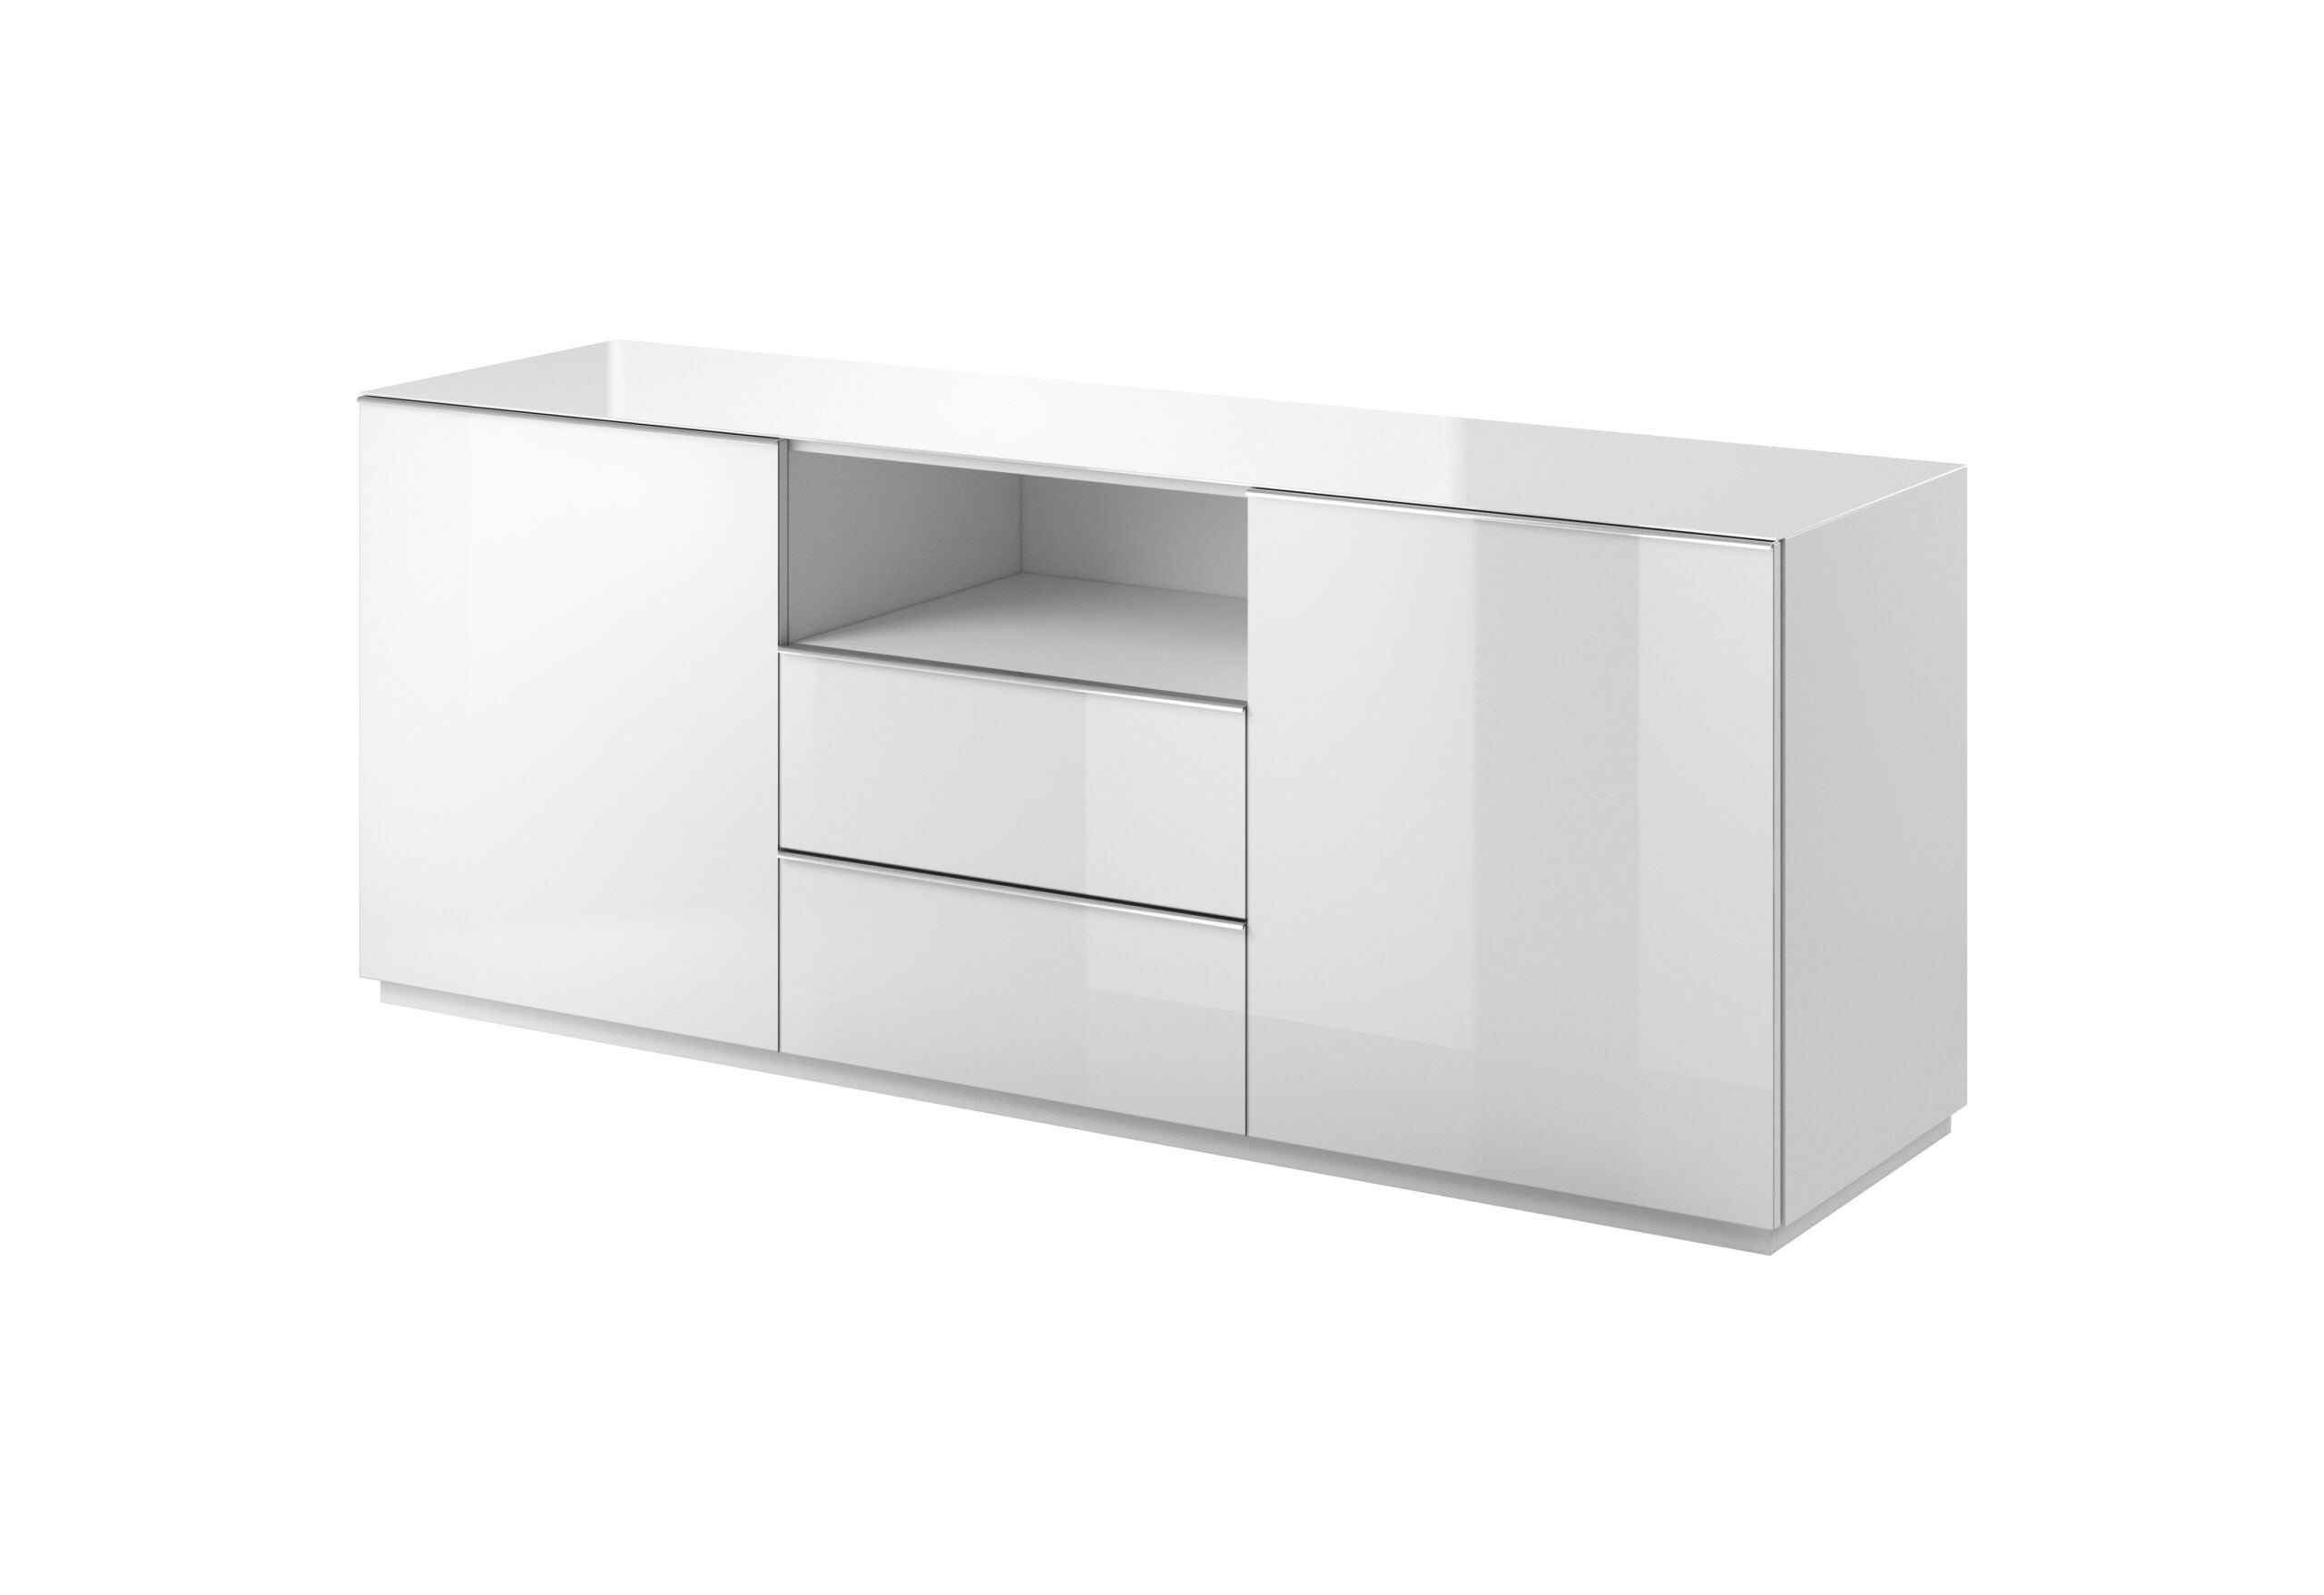 View Helio 25 Sideboard Cabinet White Glass 180cm information